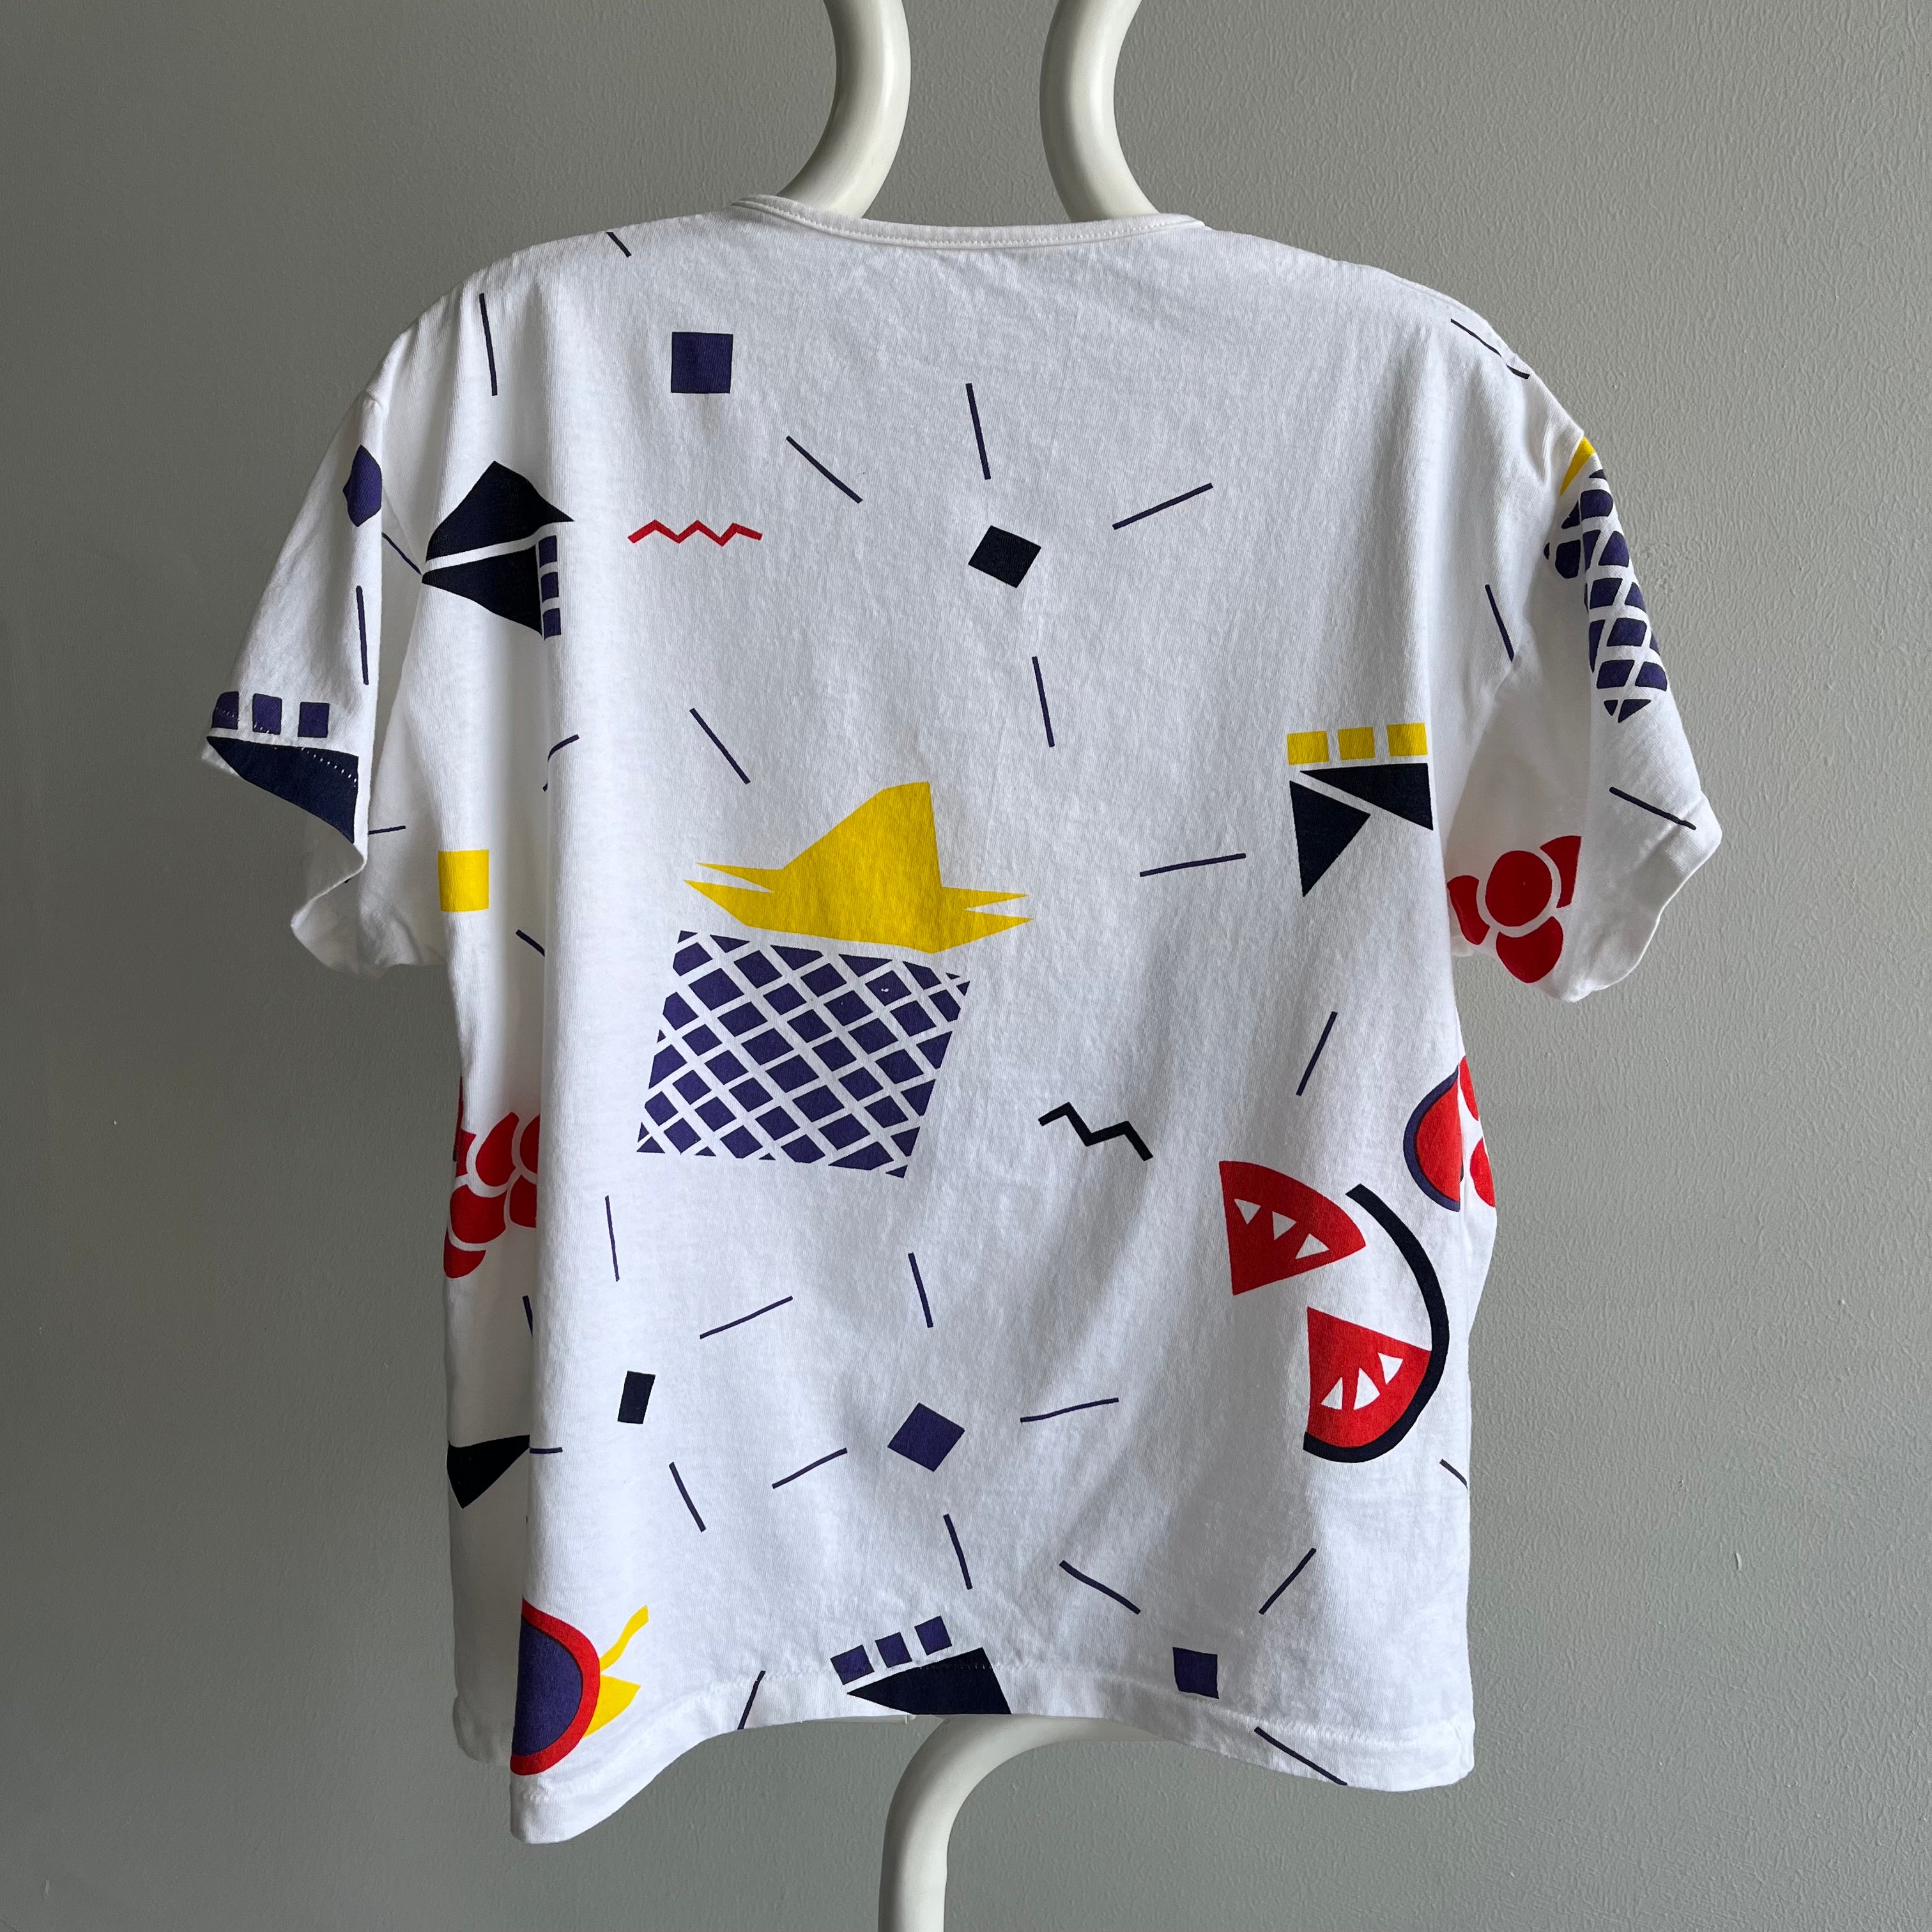 1980s Geometric Cotton T-Shirt with a Rolled Neck